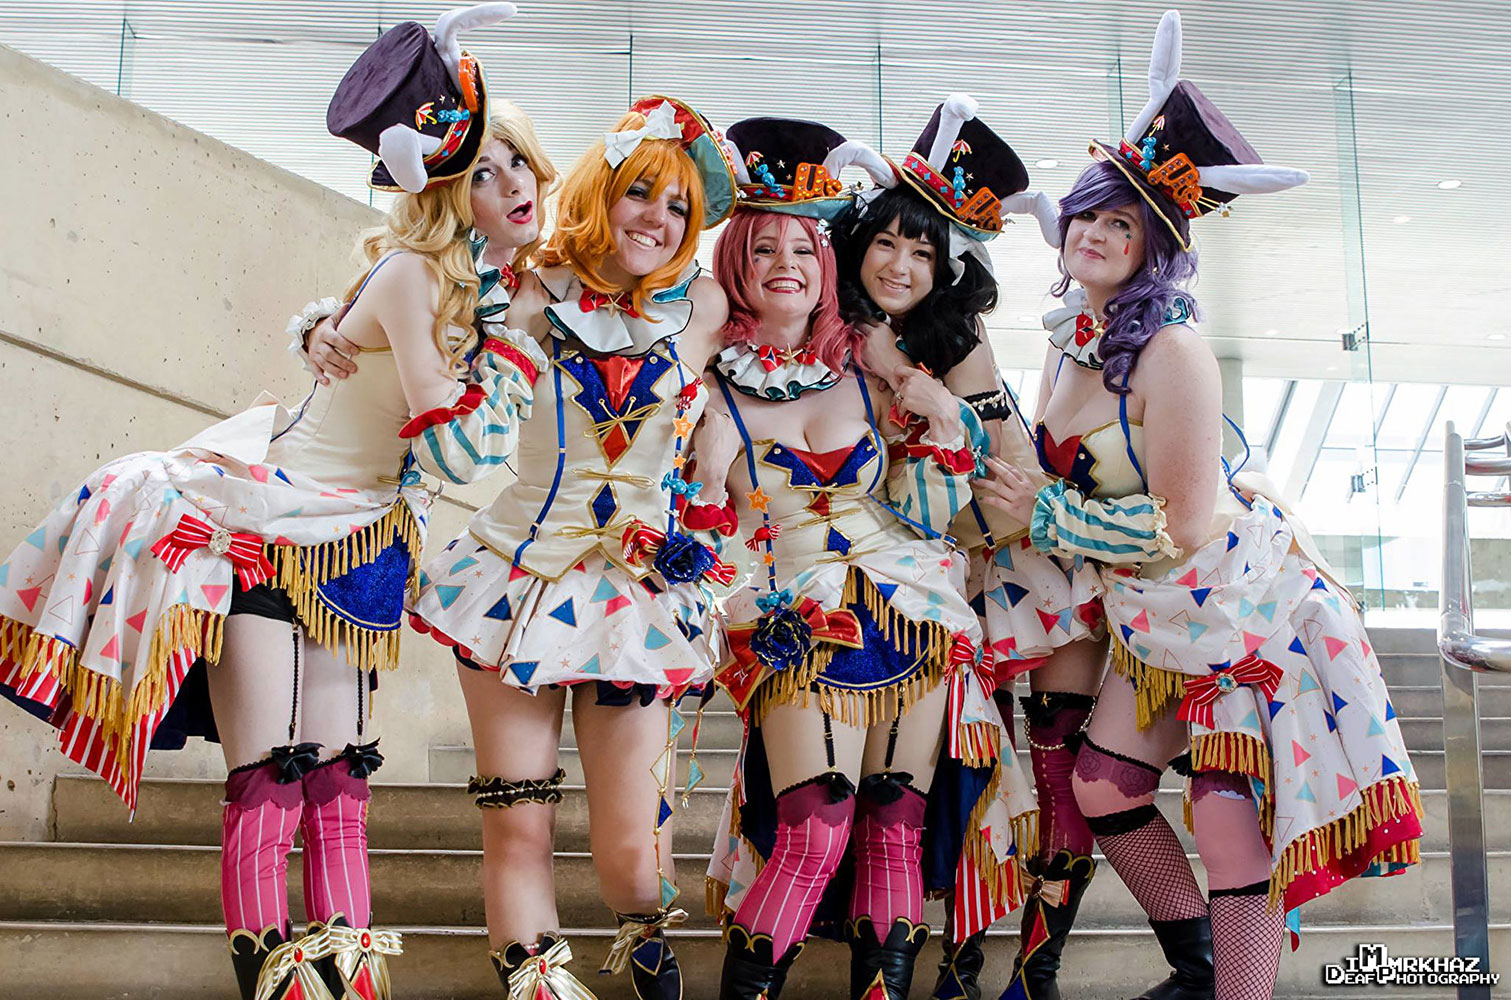 Circus Maki Cosplay. With Stars of Cassiopea, Bird King, and Geekyging